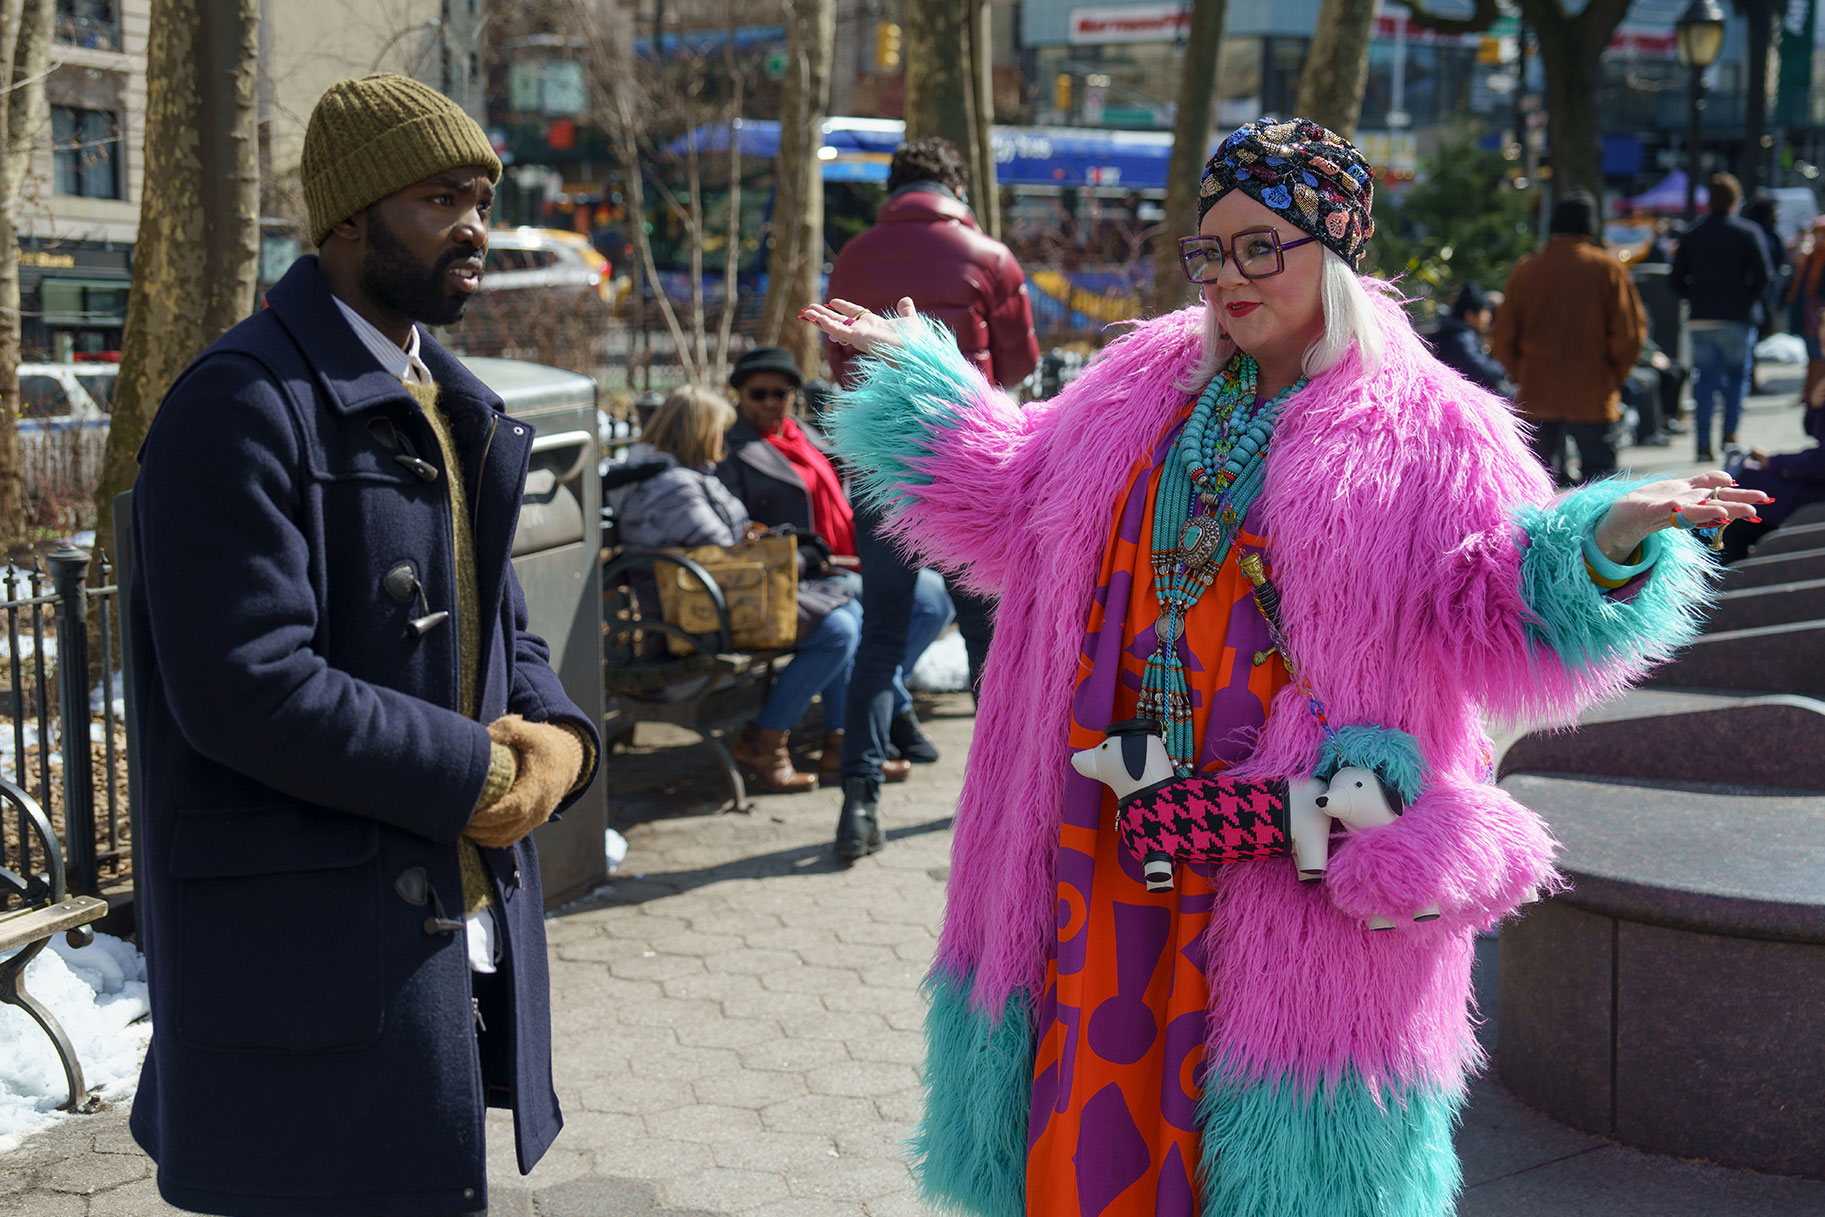 Paapa Essiedu and Melissa McCarthy stand outside in a scene from the new movie GENIE